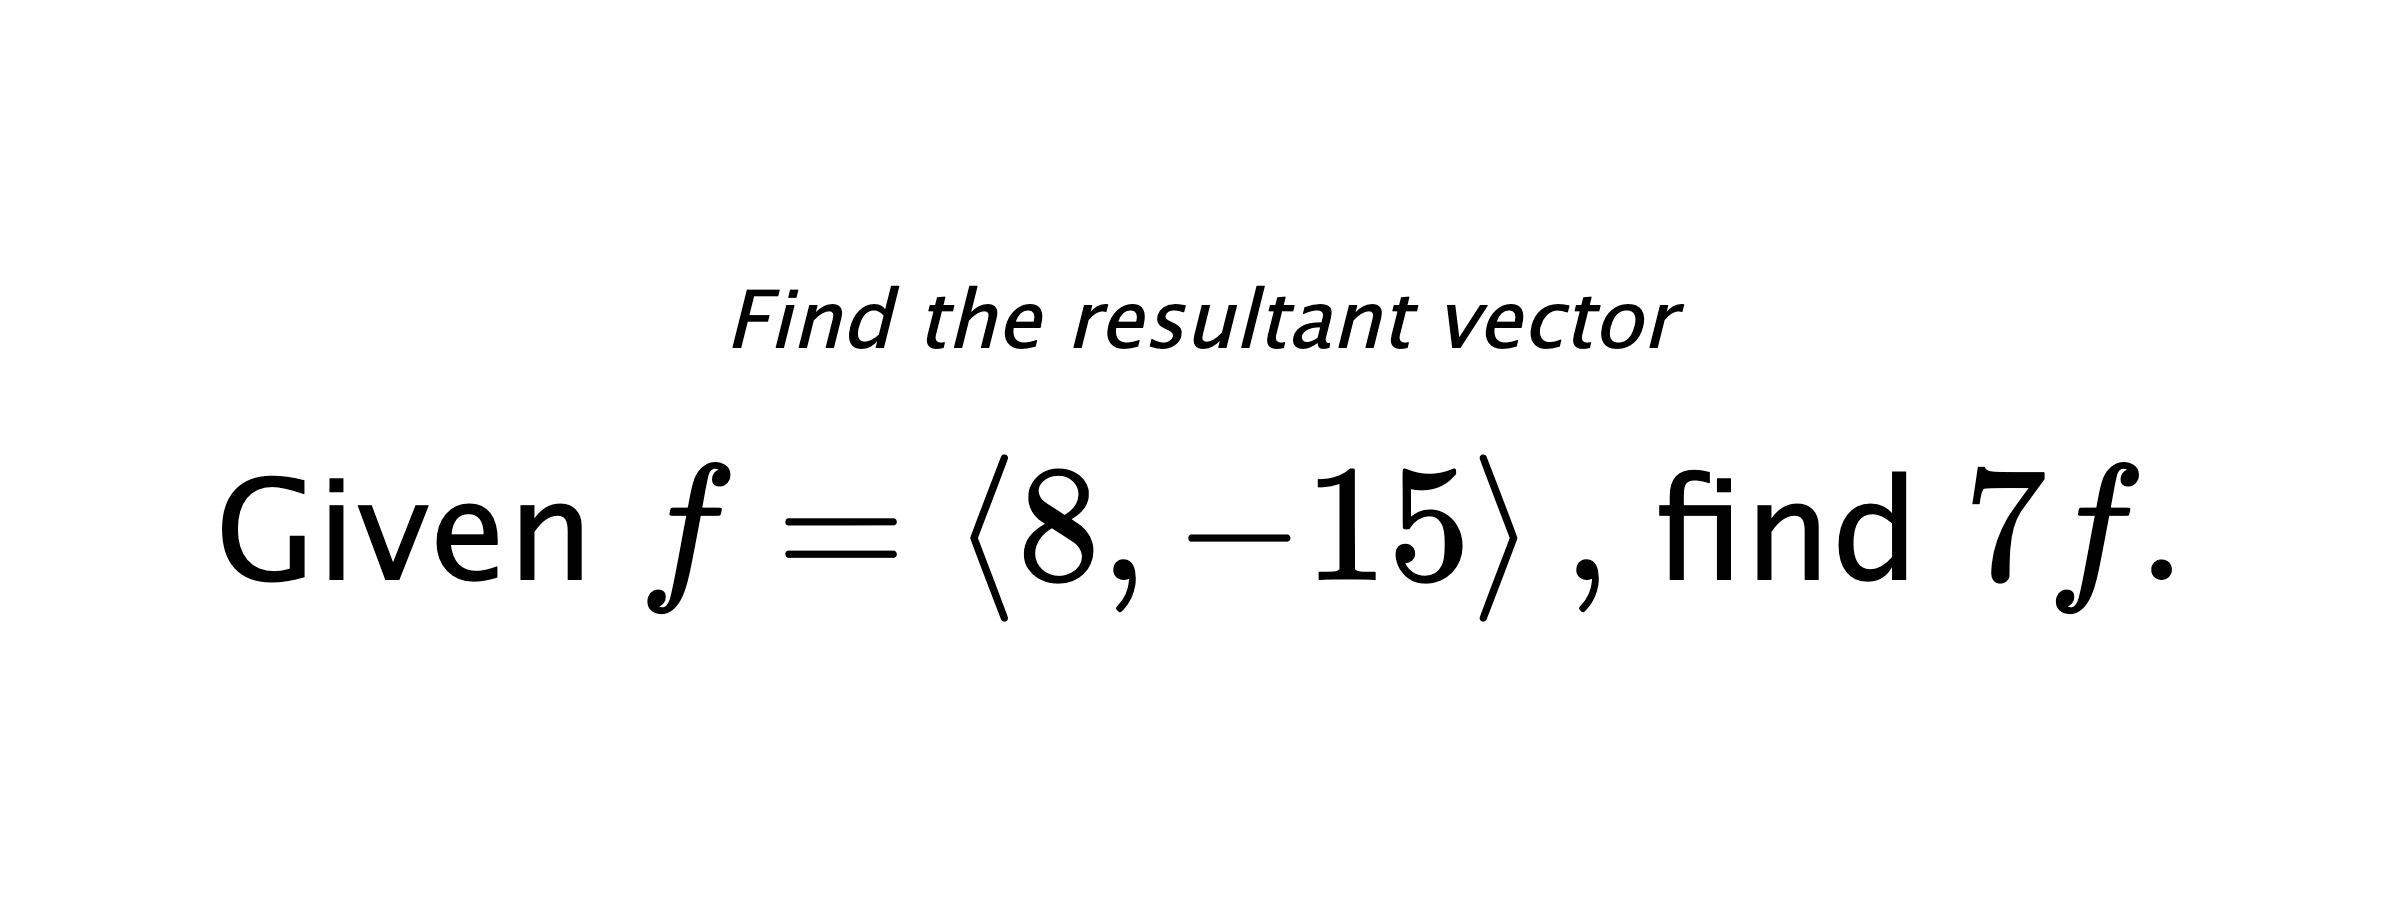 Find the resultant vector Given $ f = \left< 8,-15 \right> ,$ find $ 7f .$